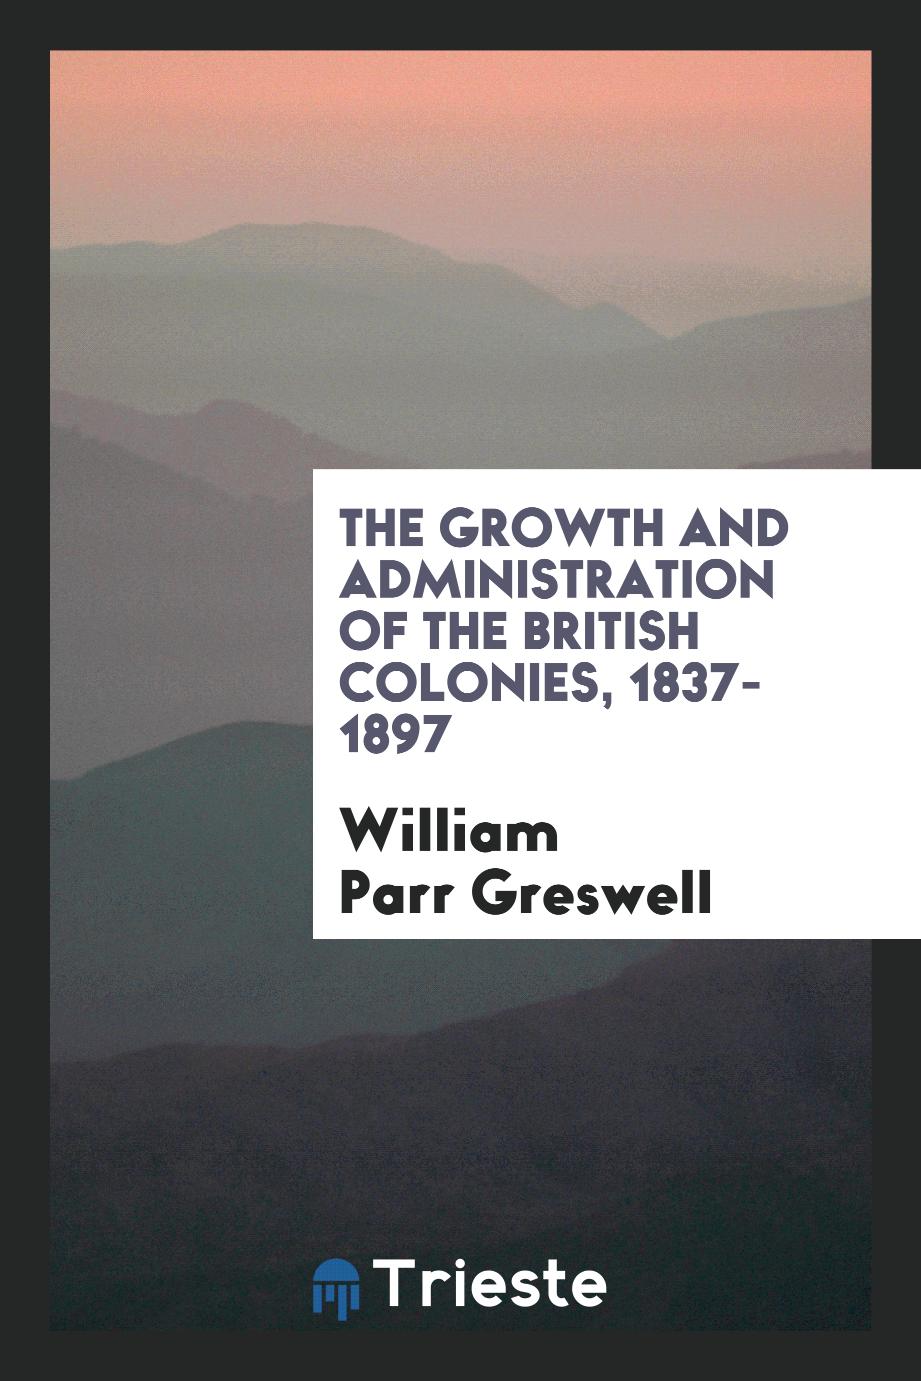 The growth and administration of the British colonies, 1837-1897